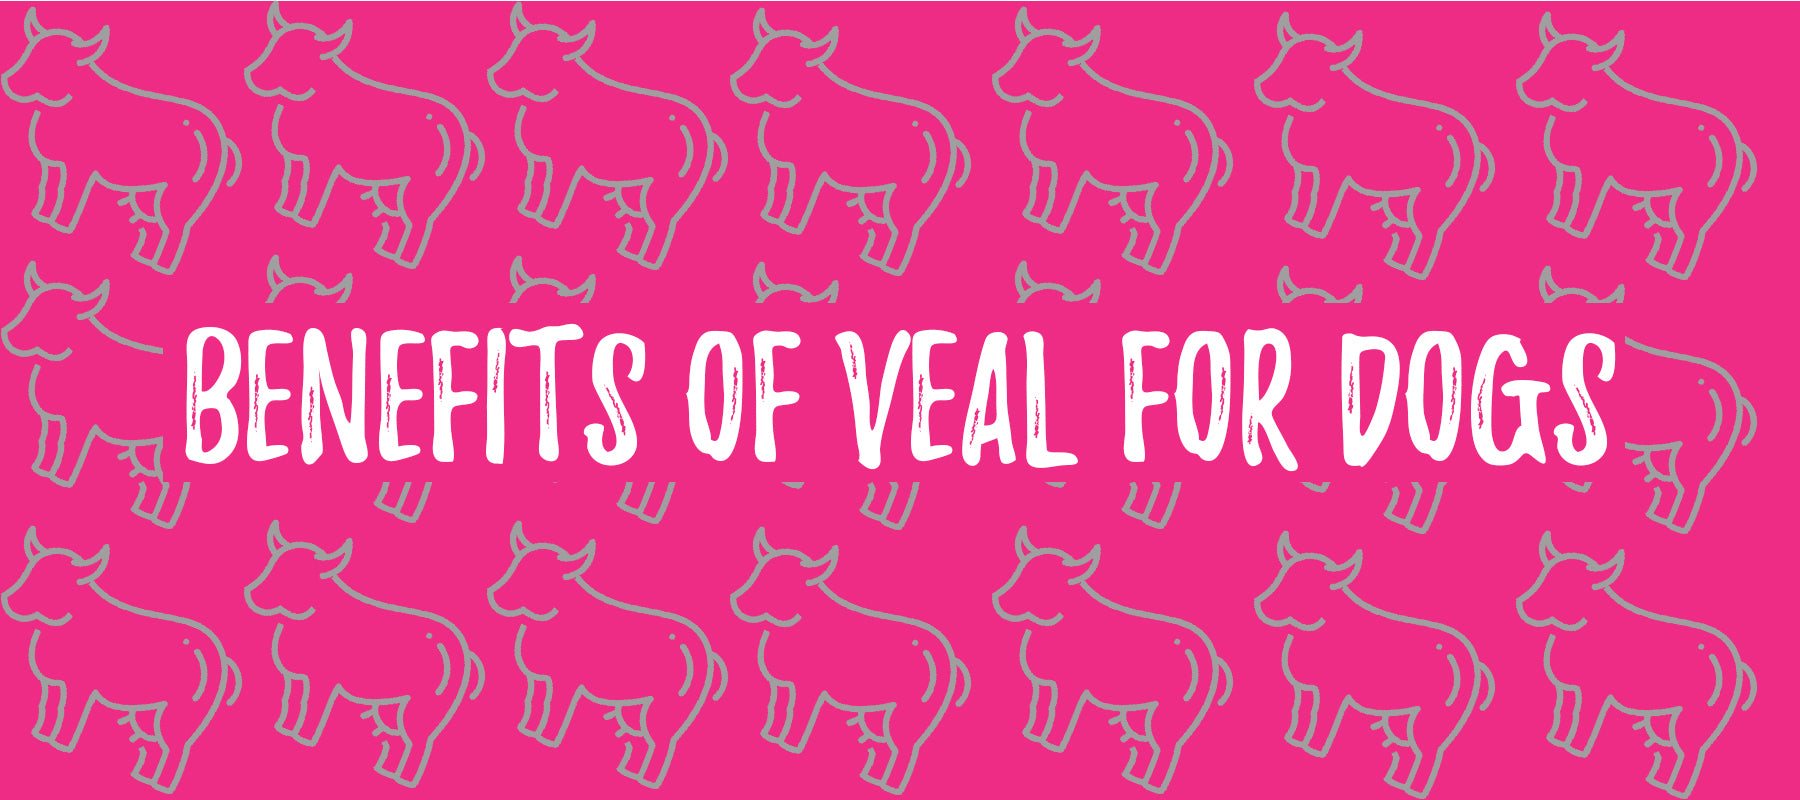 Benefits of Veal for Dogs - Laila and Me